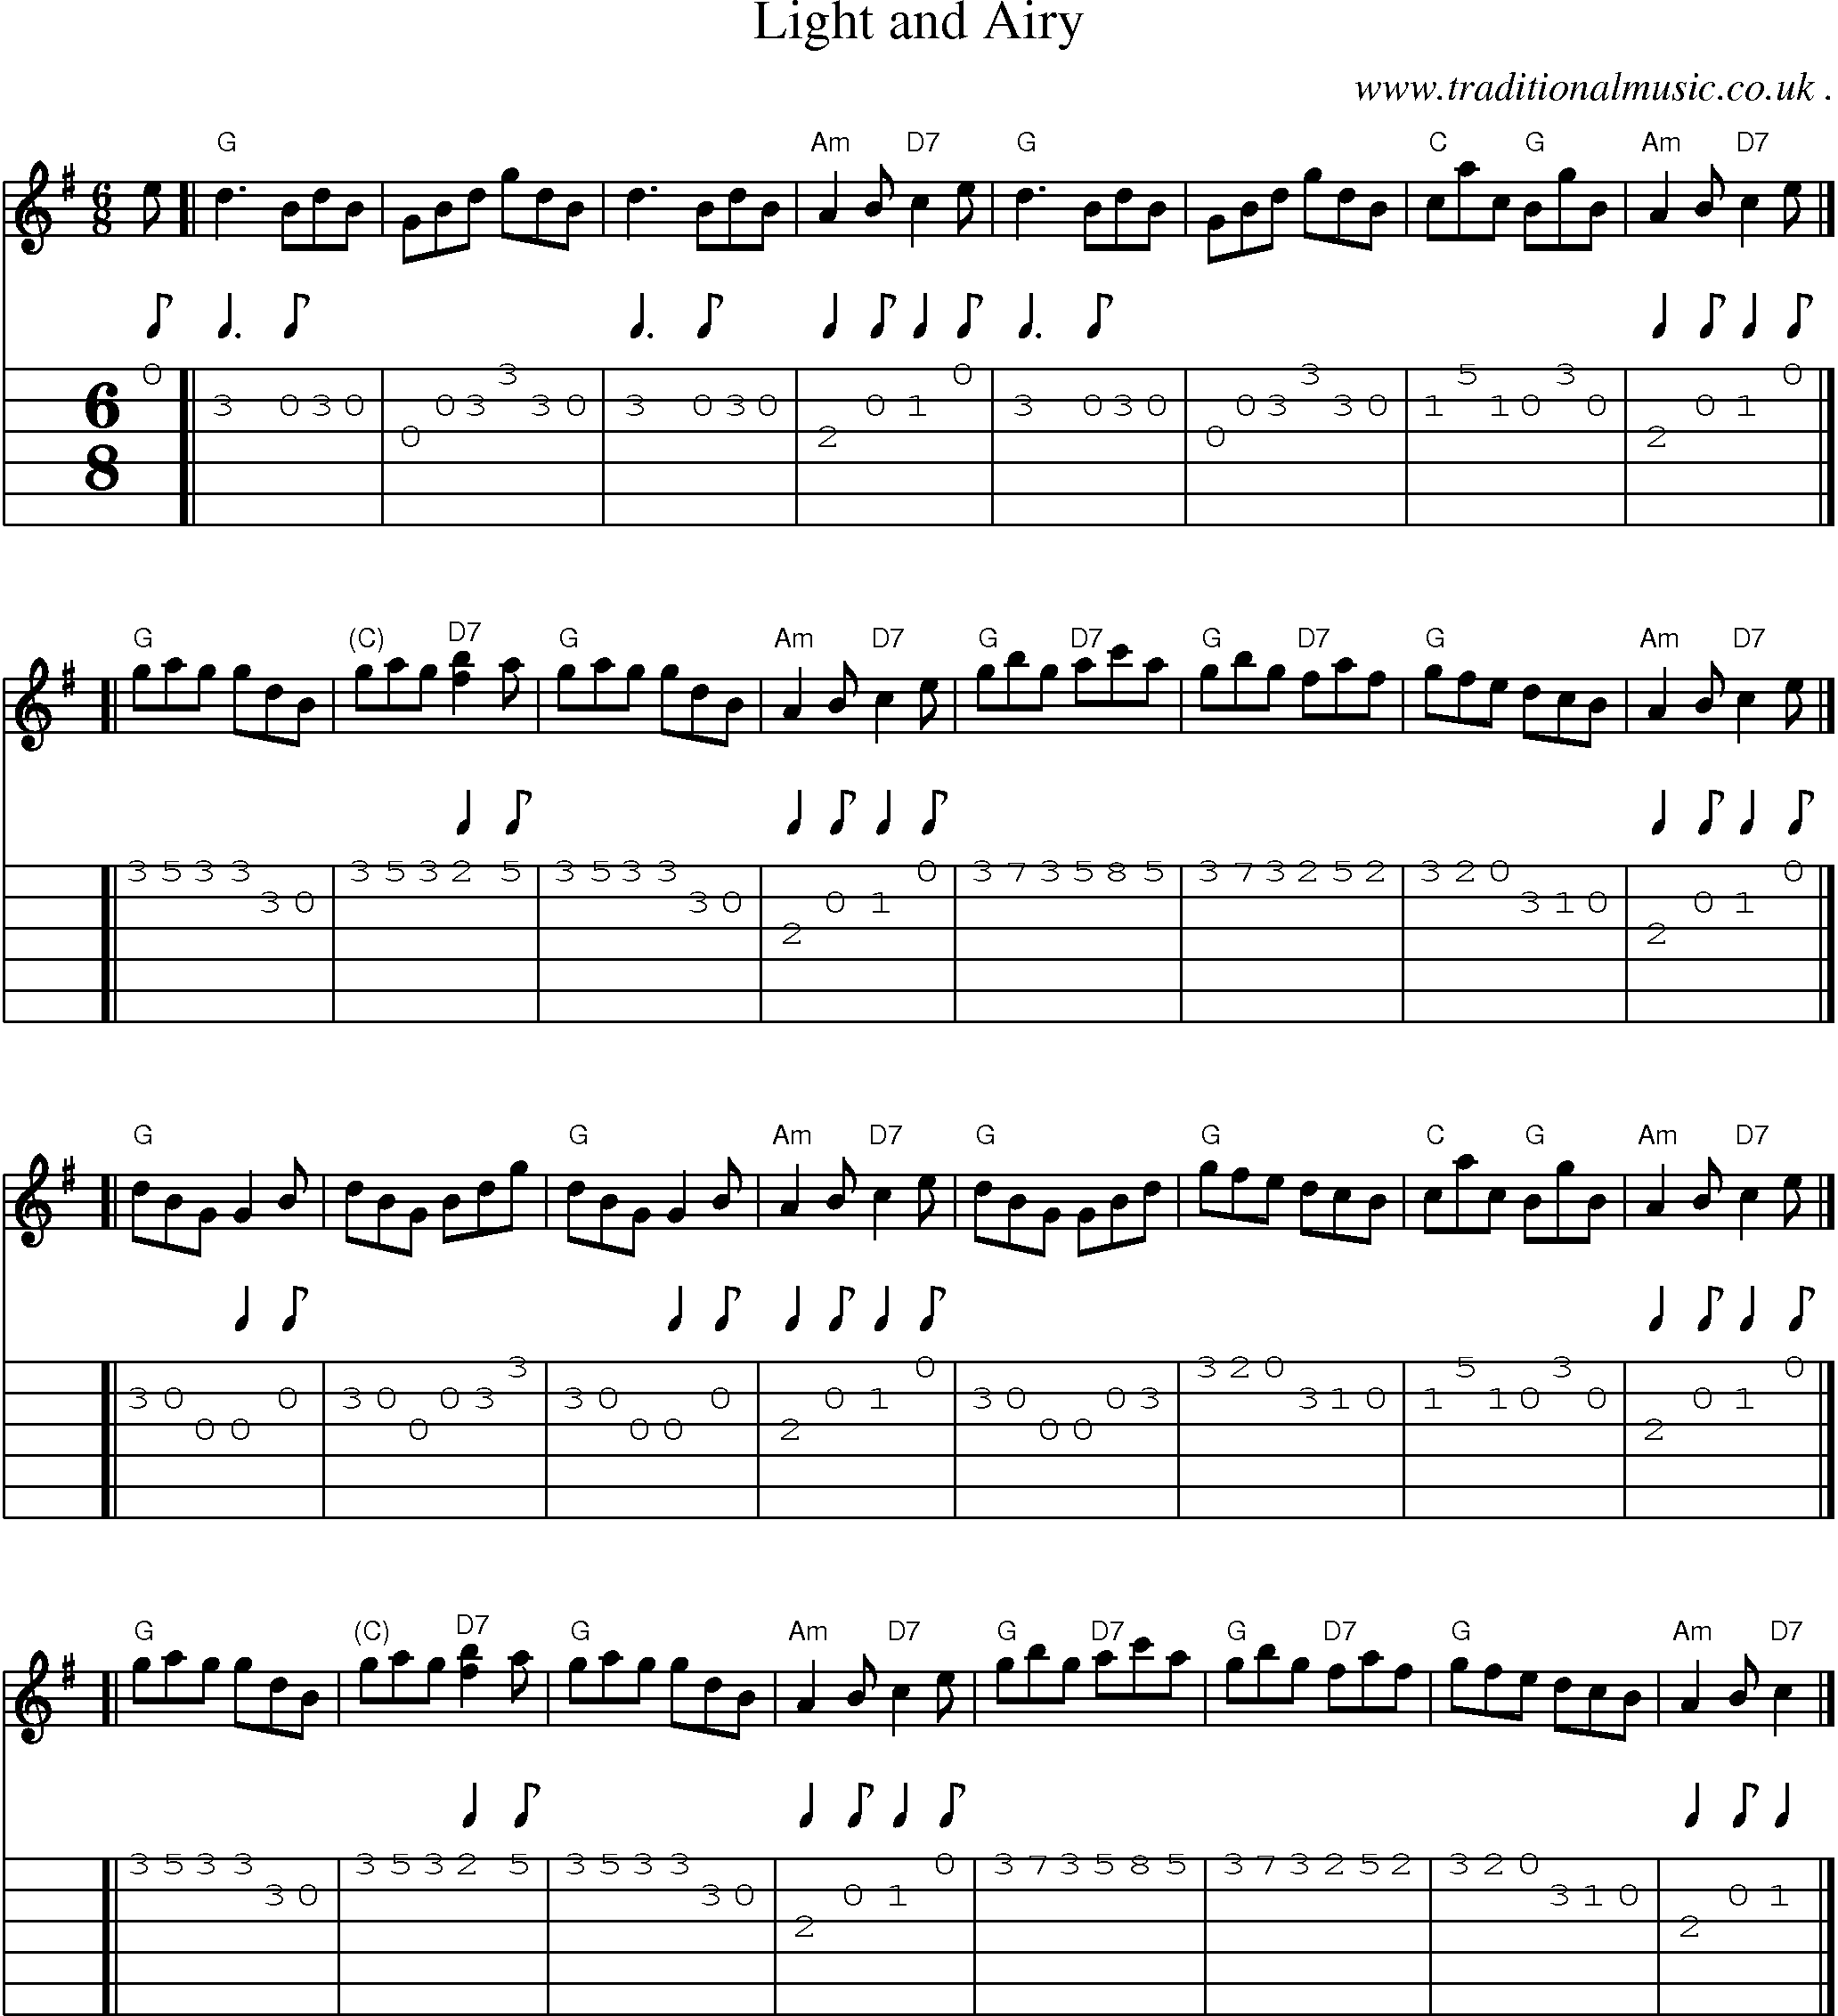 Sheet-music  score, Chords and Guitar Tabs for Light And Airy